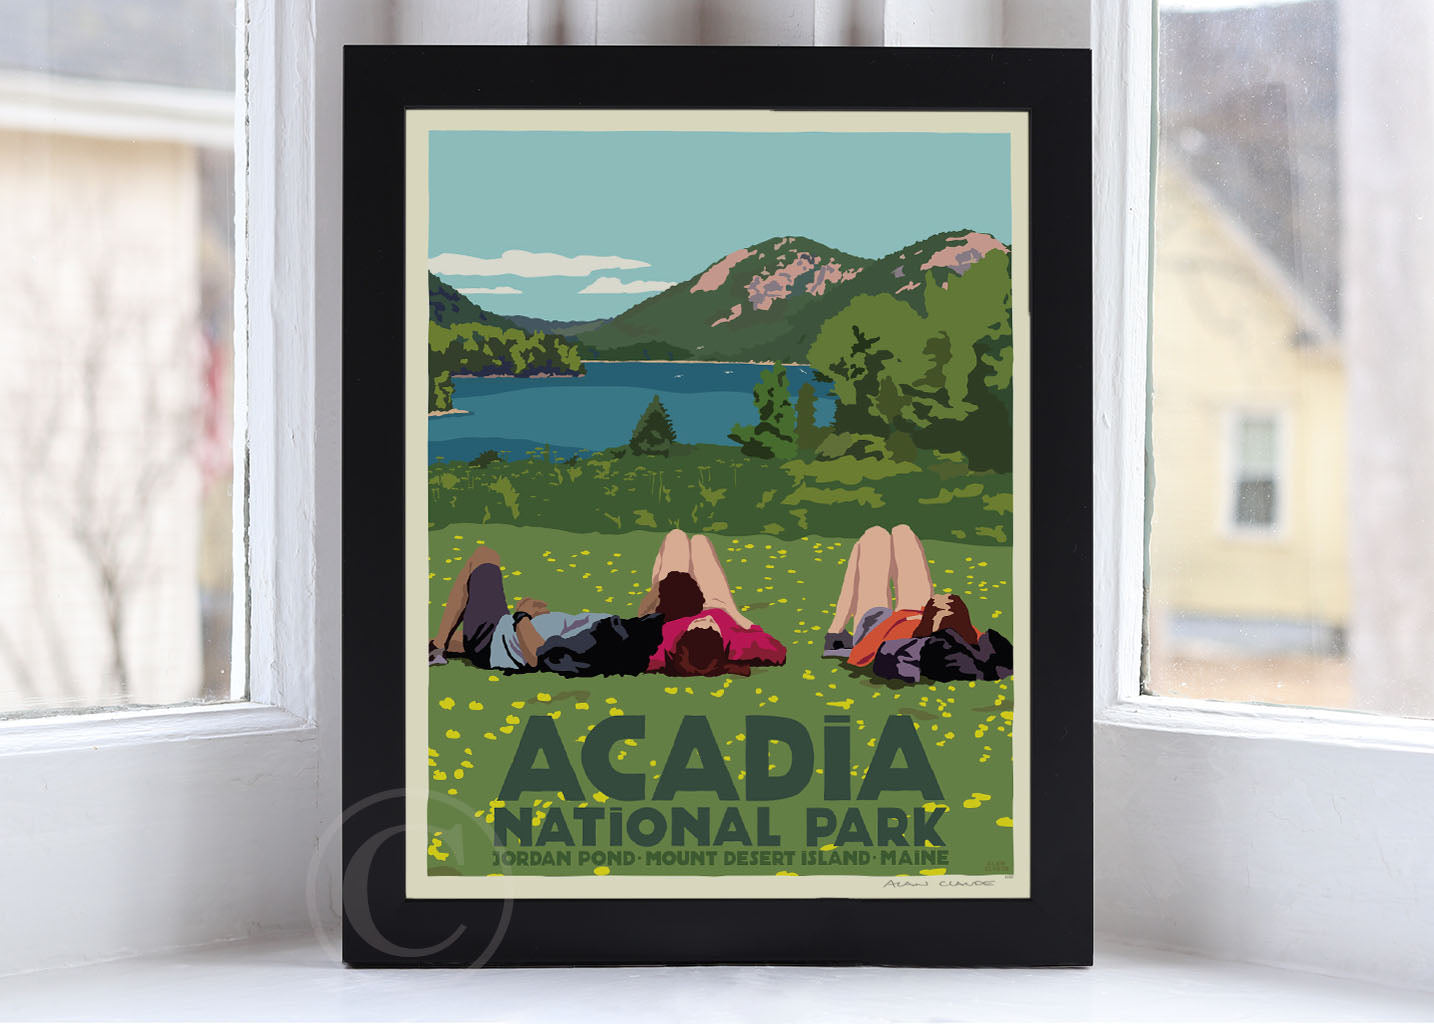 Hikers in Acadia National Park Art Print 8" x 10" Framed Wall Poster By Alan Claude - Maine